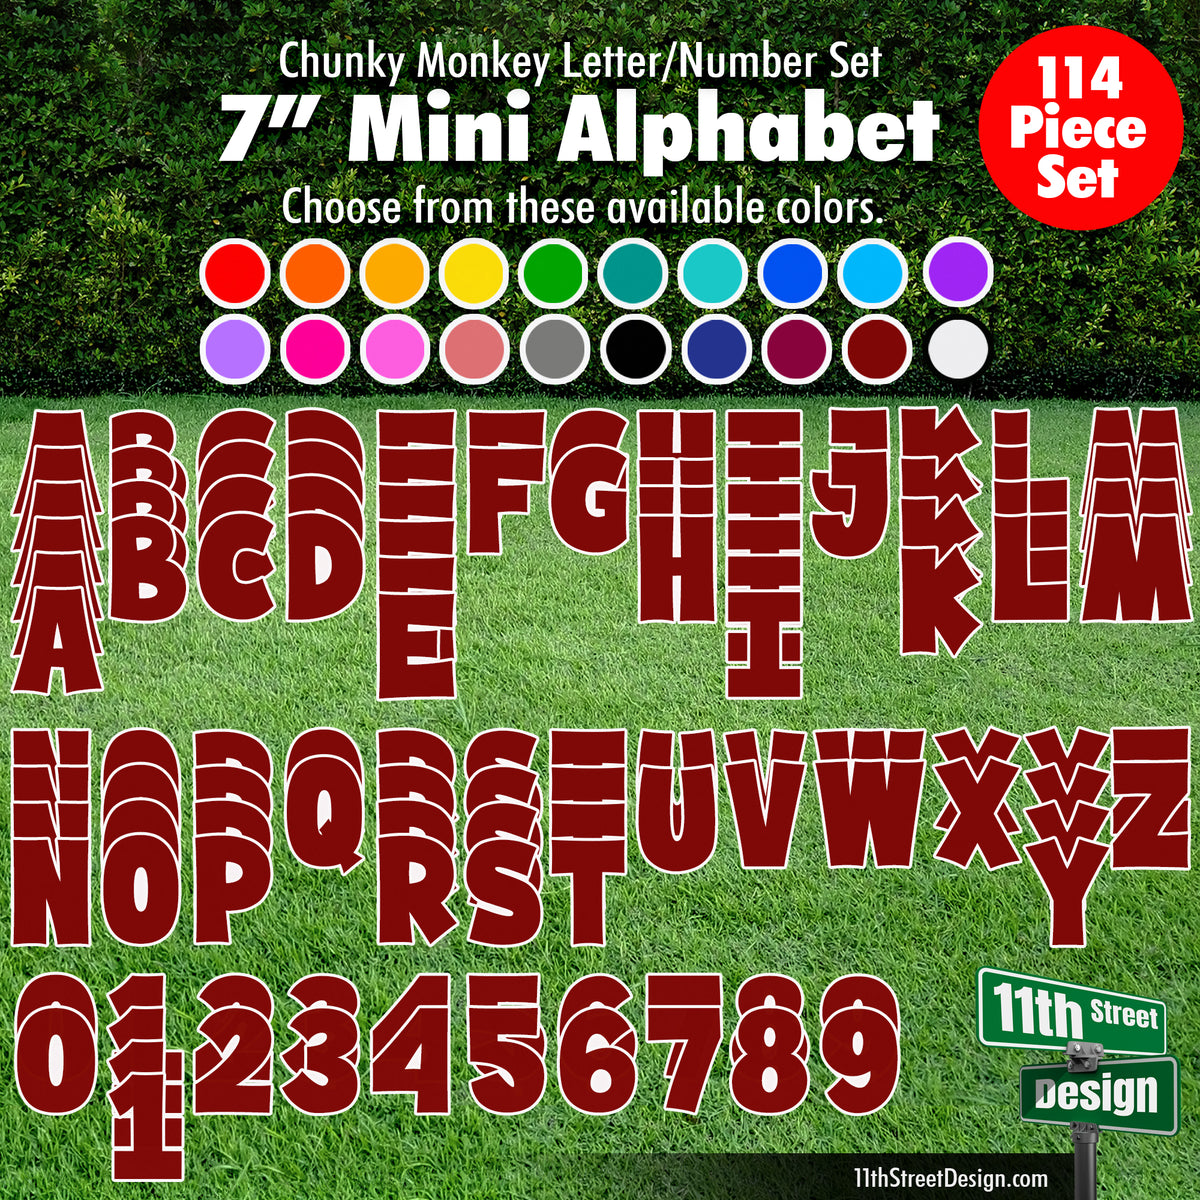 7&quot; Solid Chunky Monkey Mini Alphabet Yard Card Set Includes 114 Letters &amp; Numbers